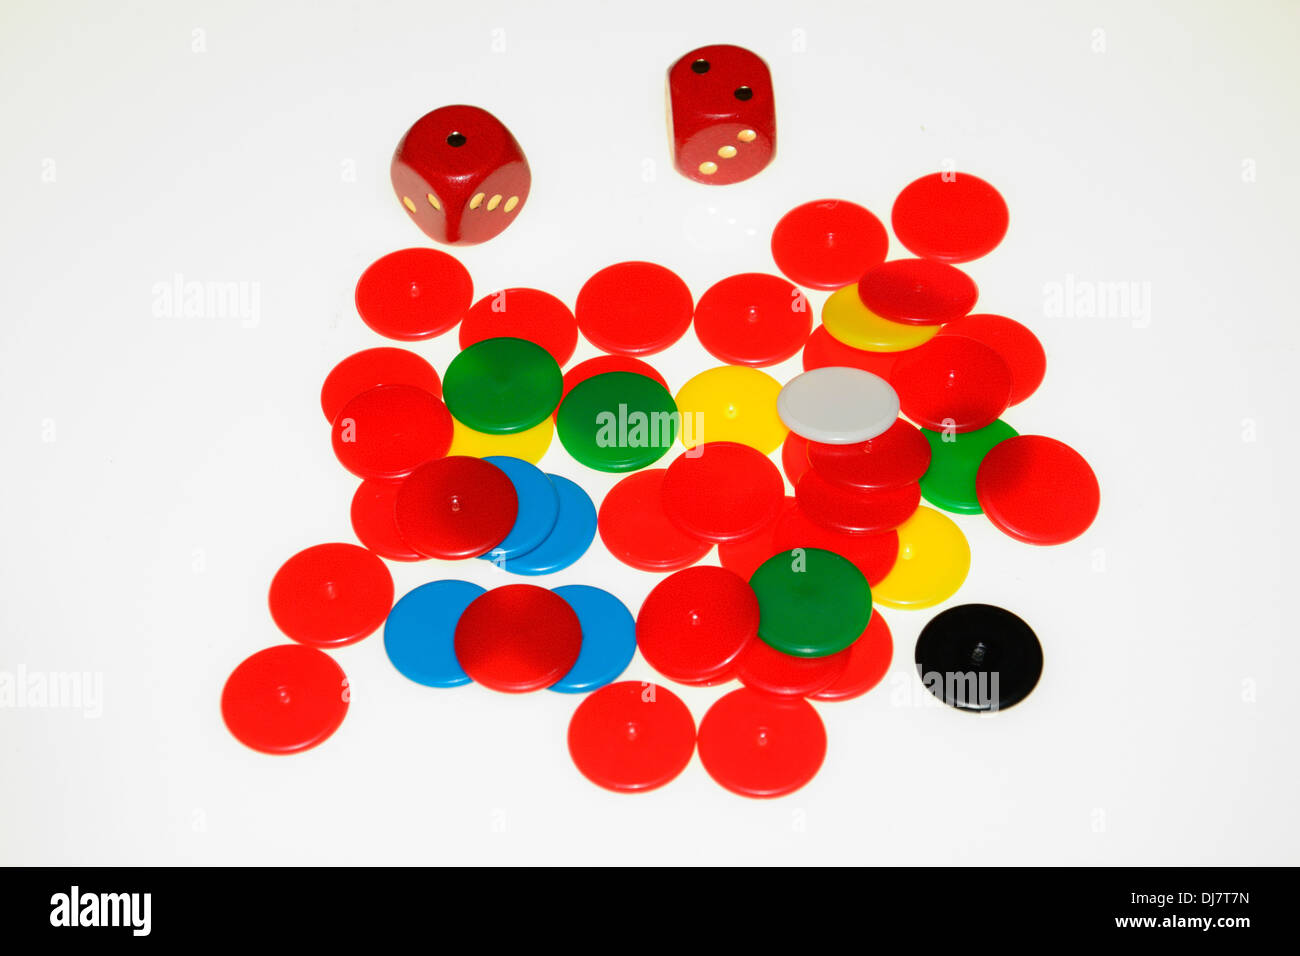 Random Scattered Counters and Dice Stock Photo